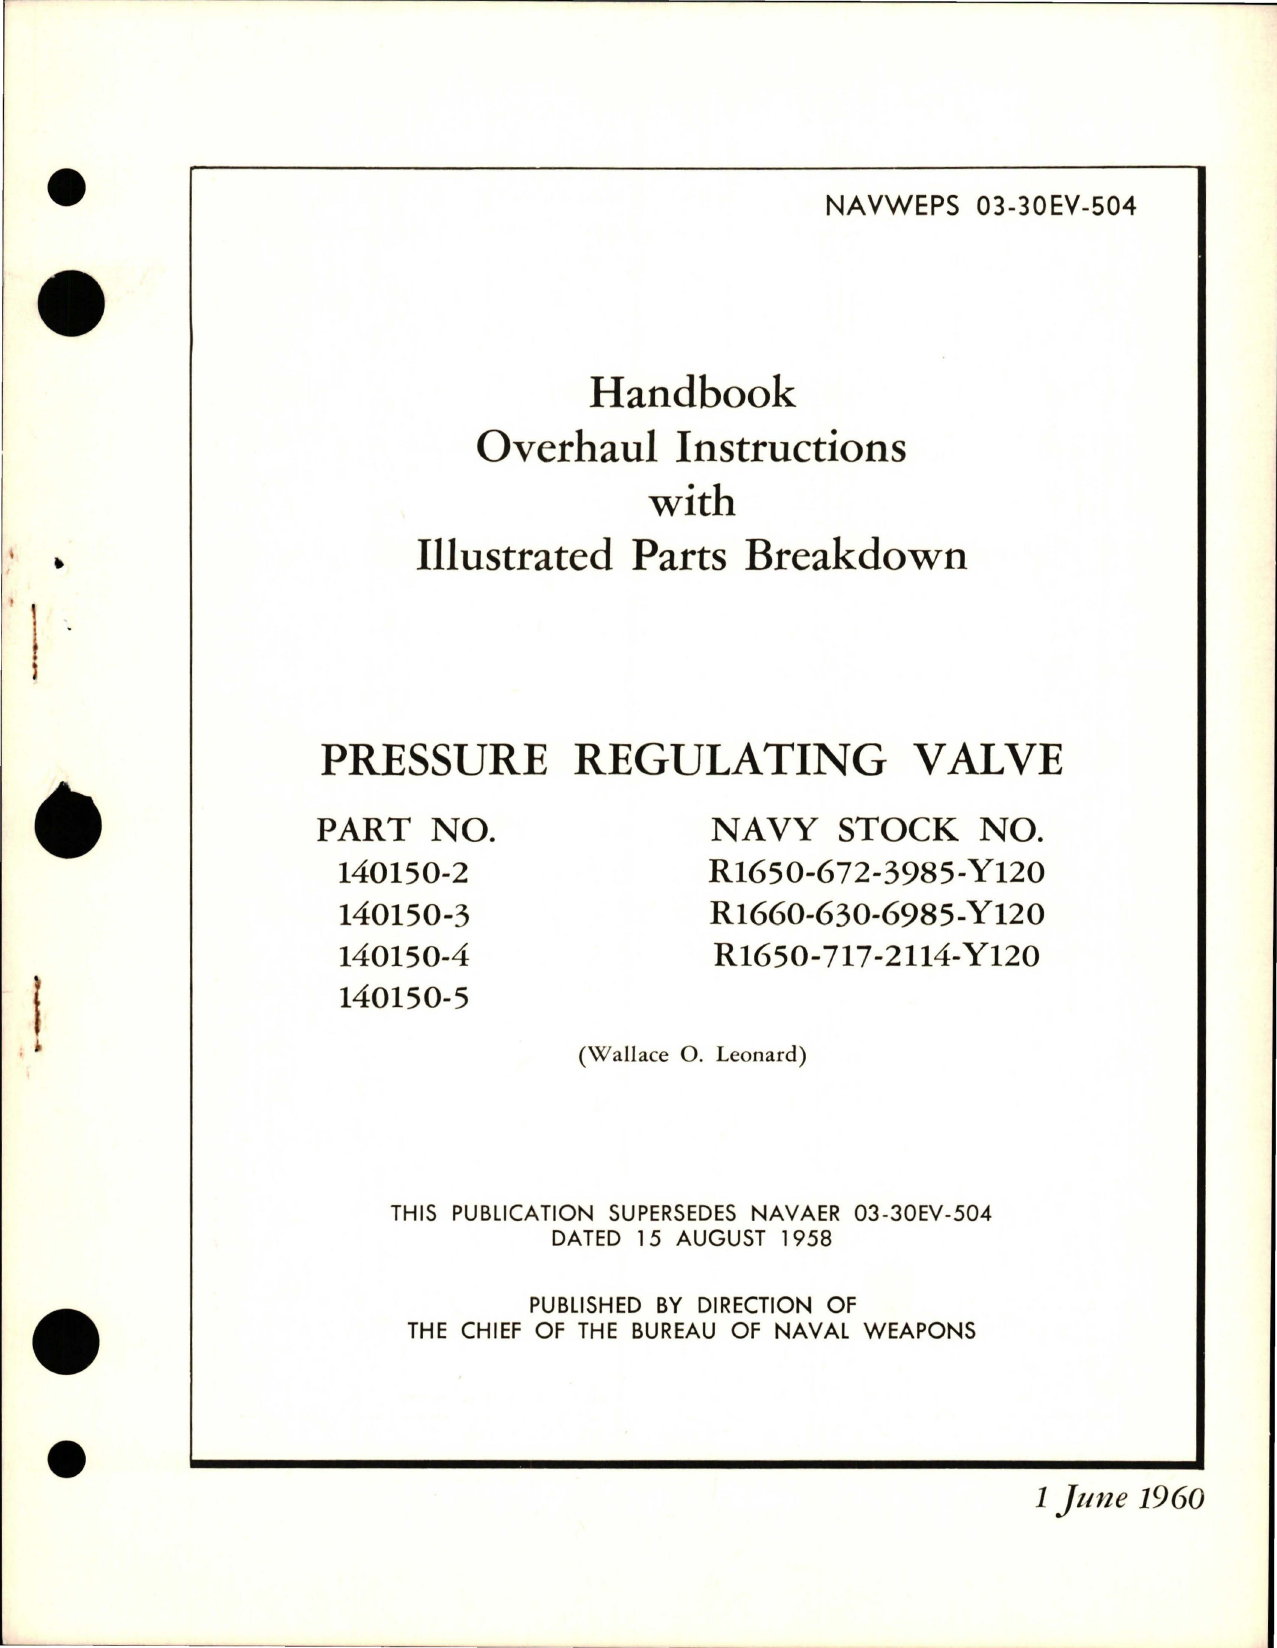 Sample page 1 from AirCorps Library document: Overhaul Instructions with Parts Breakdown for Pressure Regulating Valve